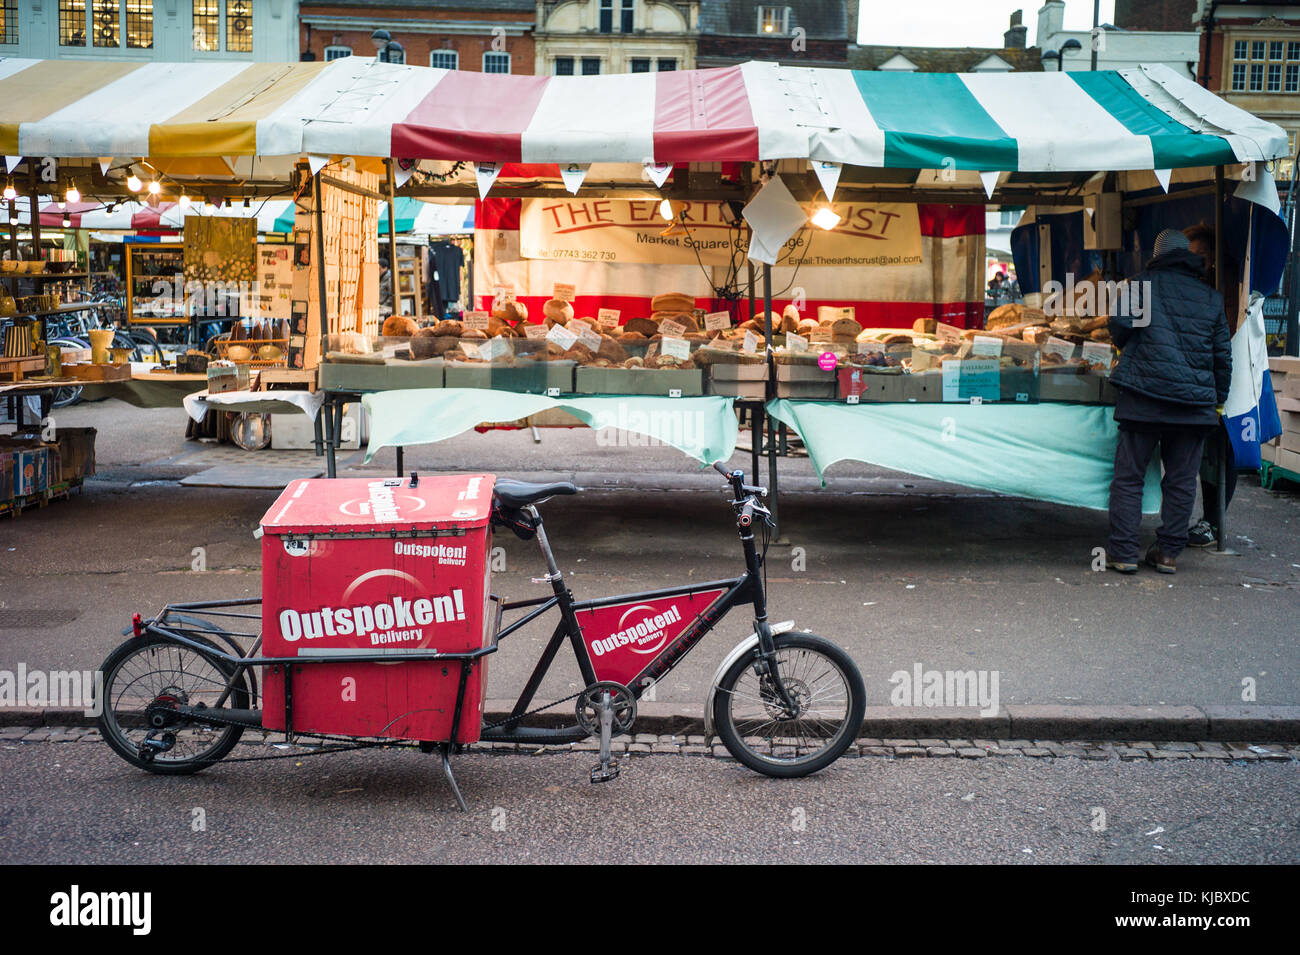 Eco Delivery - A cargo bike belonging to the Outspoken last mile ...